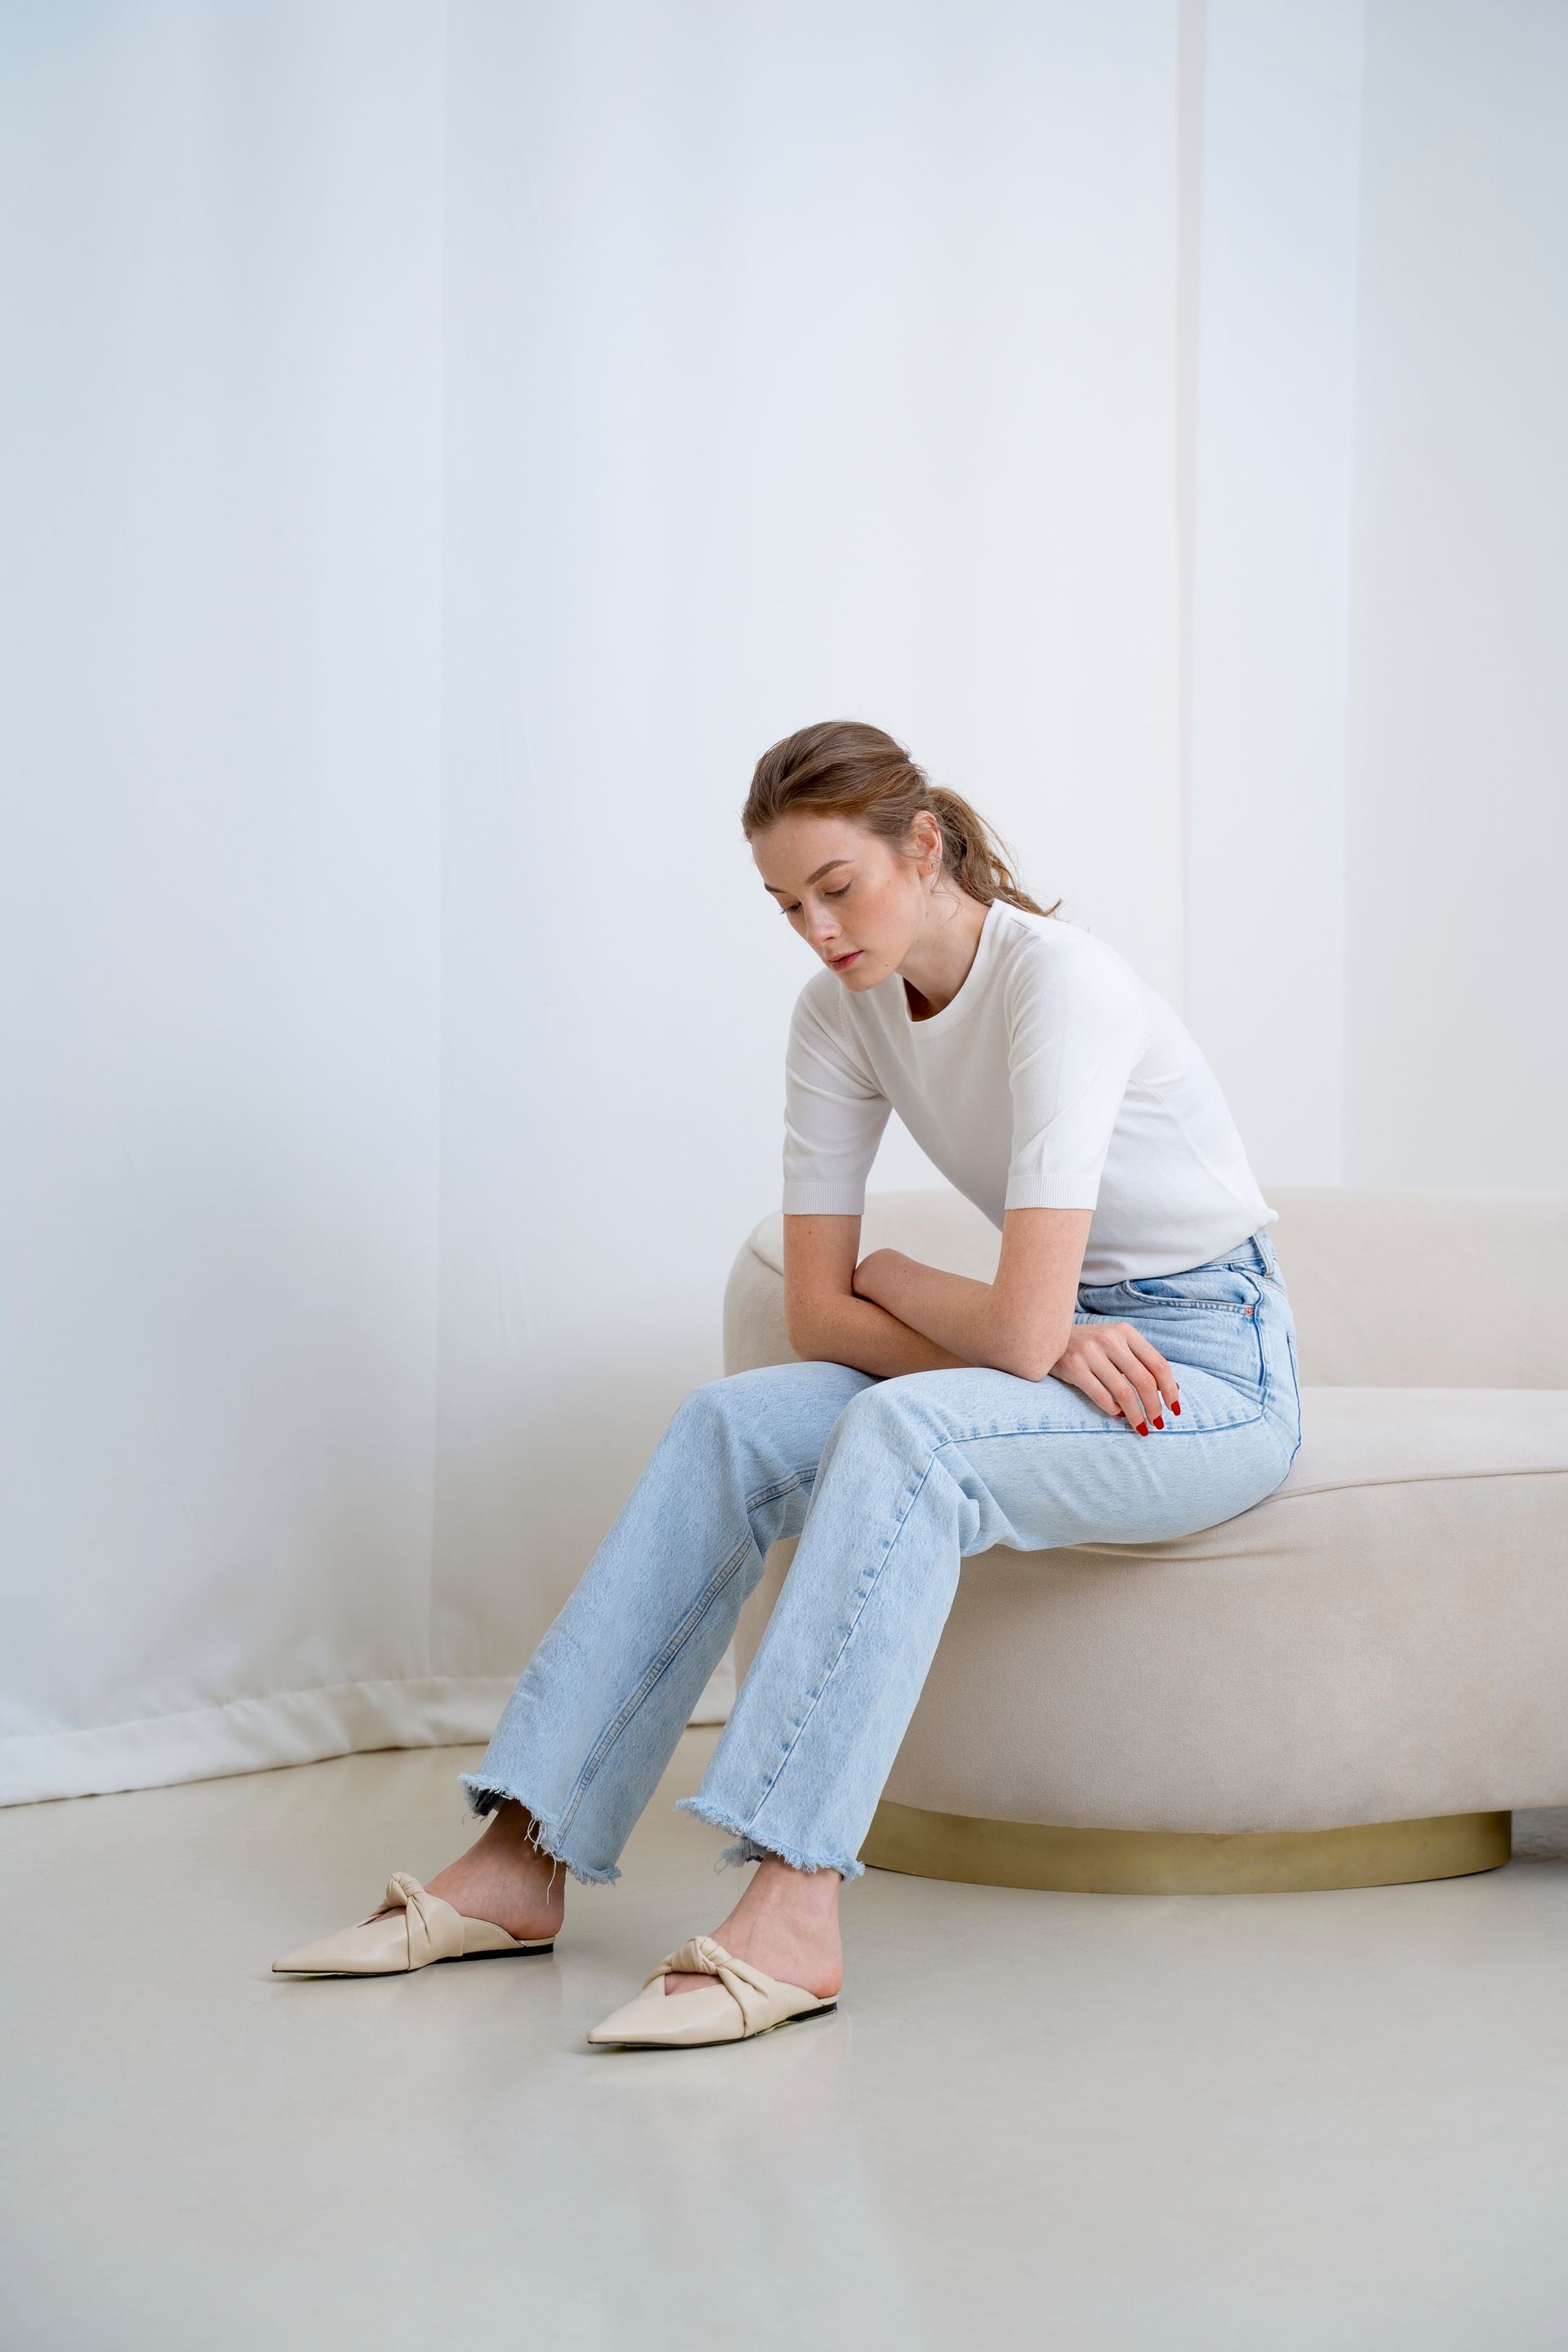 a woman is sitting on a couch wearing jeans and a white shirt .